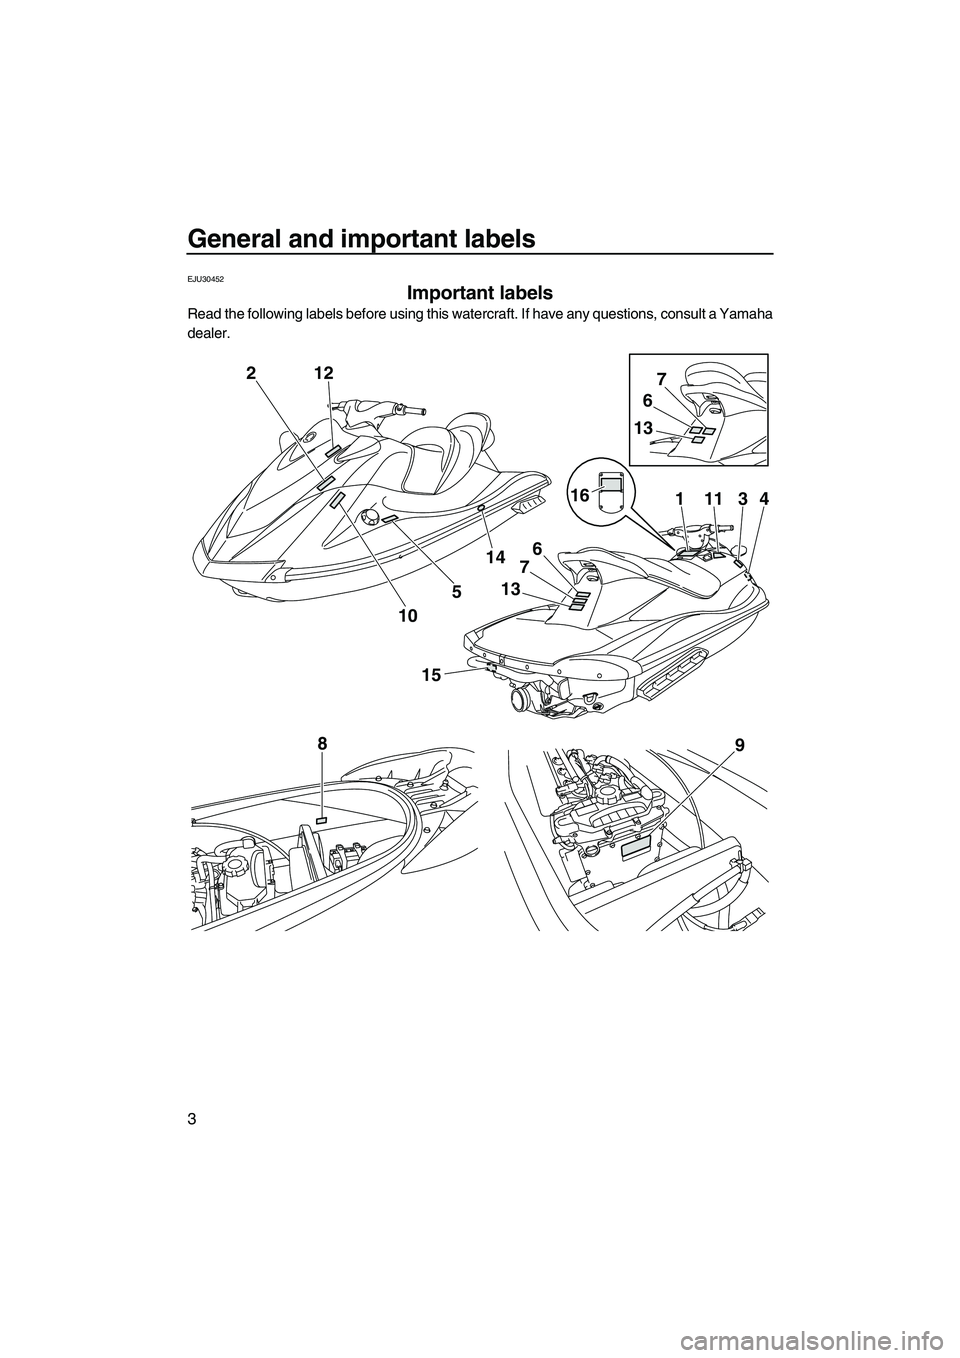 YAMAHA VX CRUISER 2010  Owners Manual General and important labels
3
EJU30452
Important labels 
Read the following labels before using this watercraft. If have any questions, consult a Yamaha
dealer.
2
15
98
13
6
7
16
6
7
13
11134
12
10
5